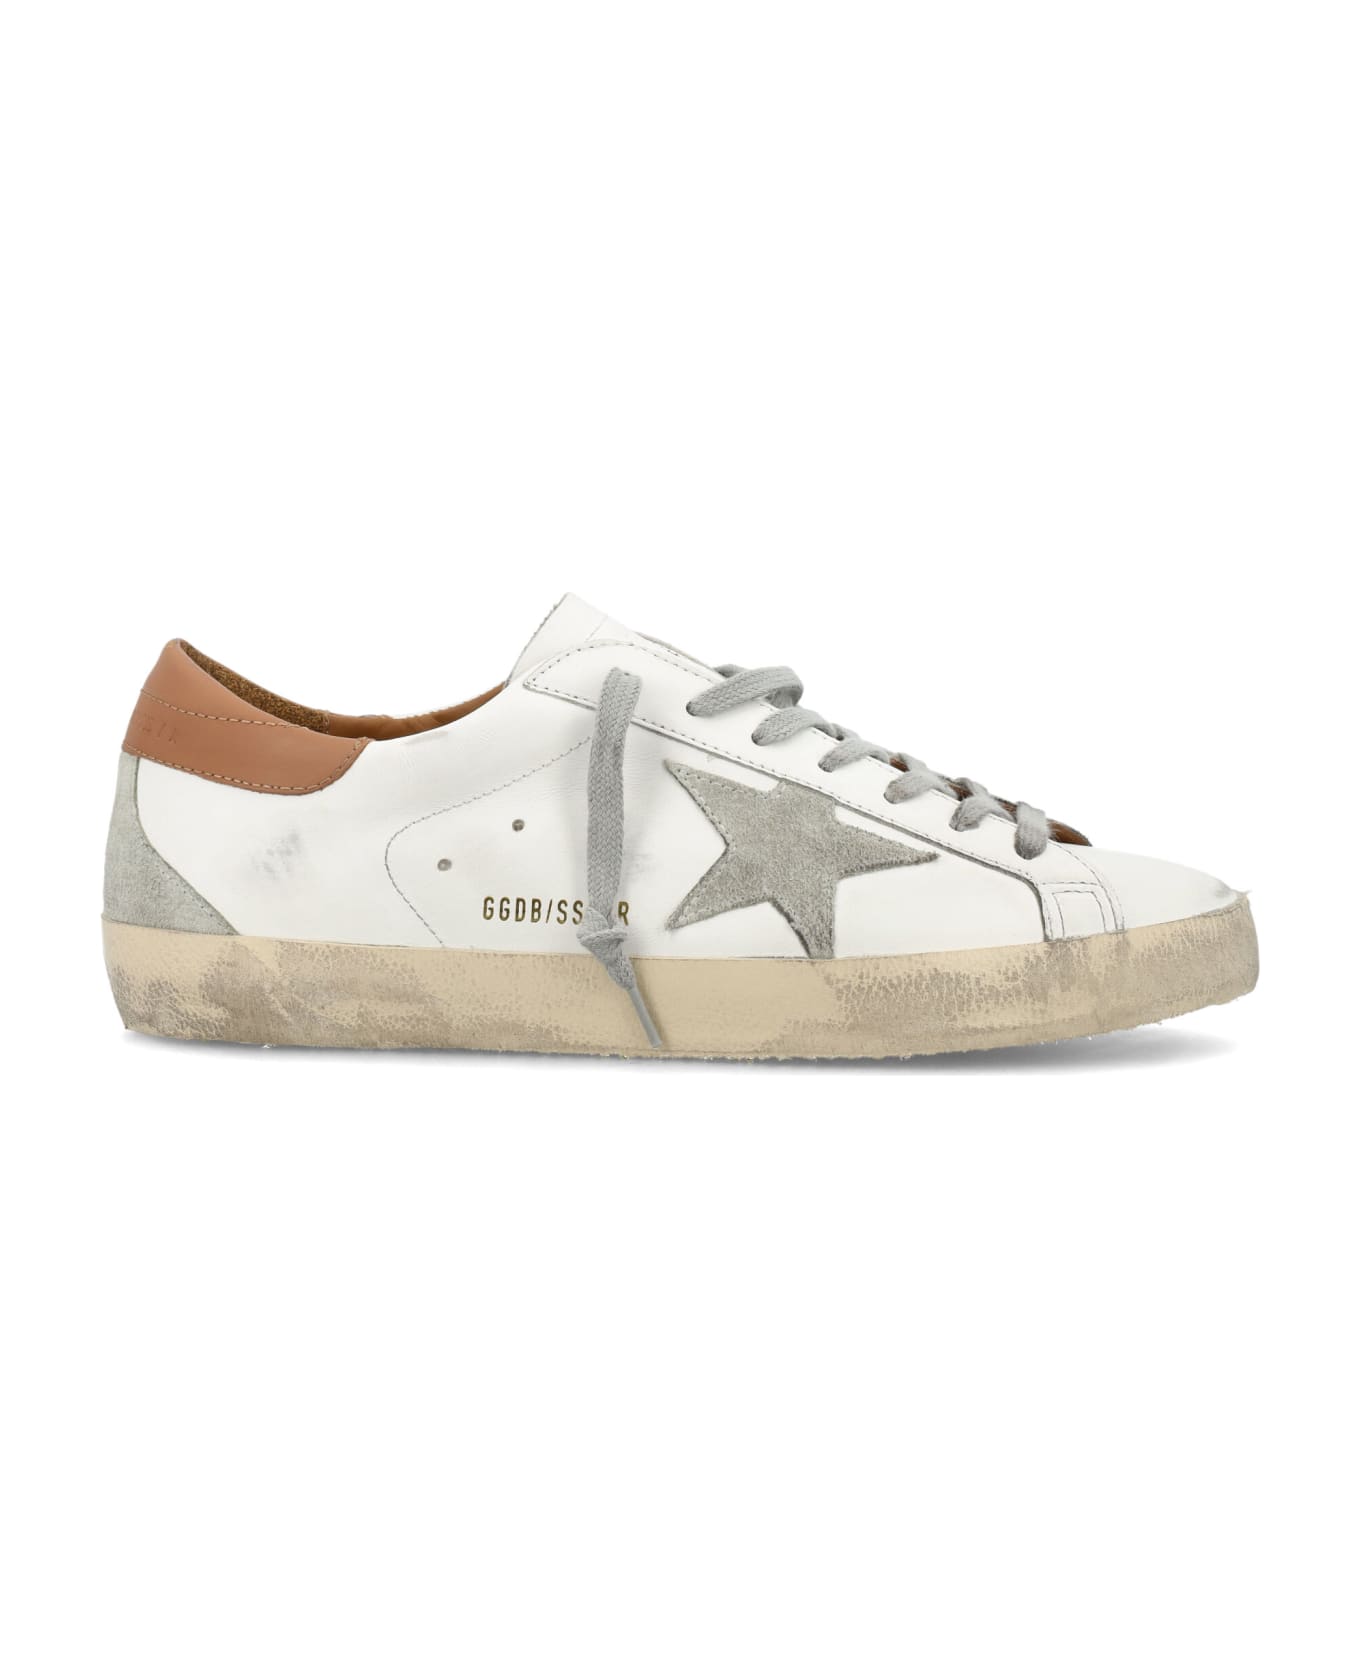 Golden Goose Superstar Classic Sneakers - White/Ice/Light Brown